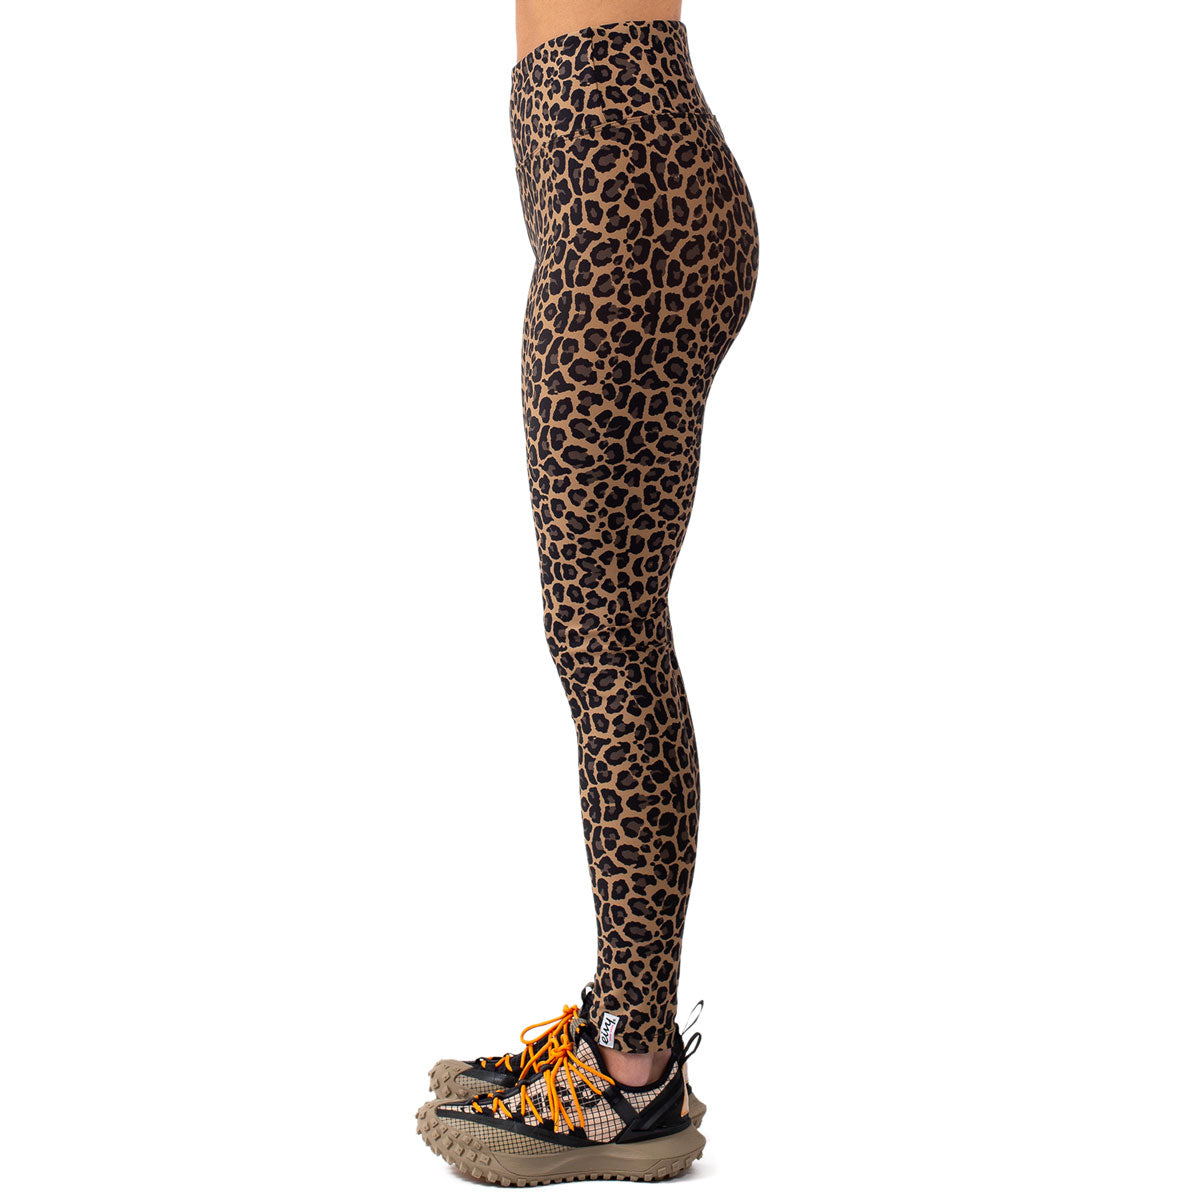 Eivy Icecold Tights Snowboard Base Layer - Leopard image 3